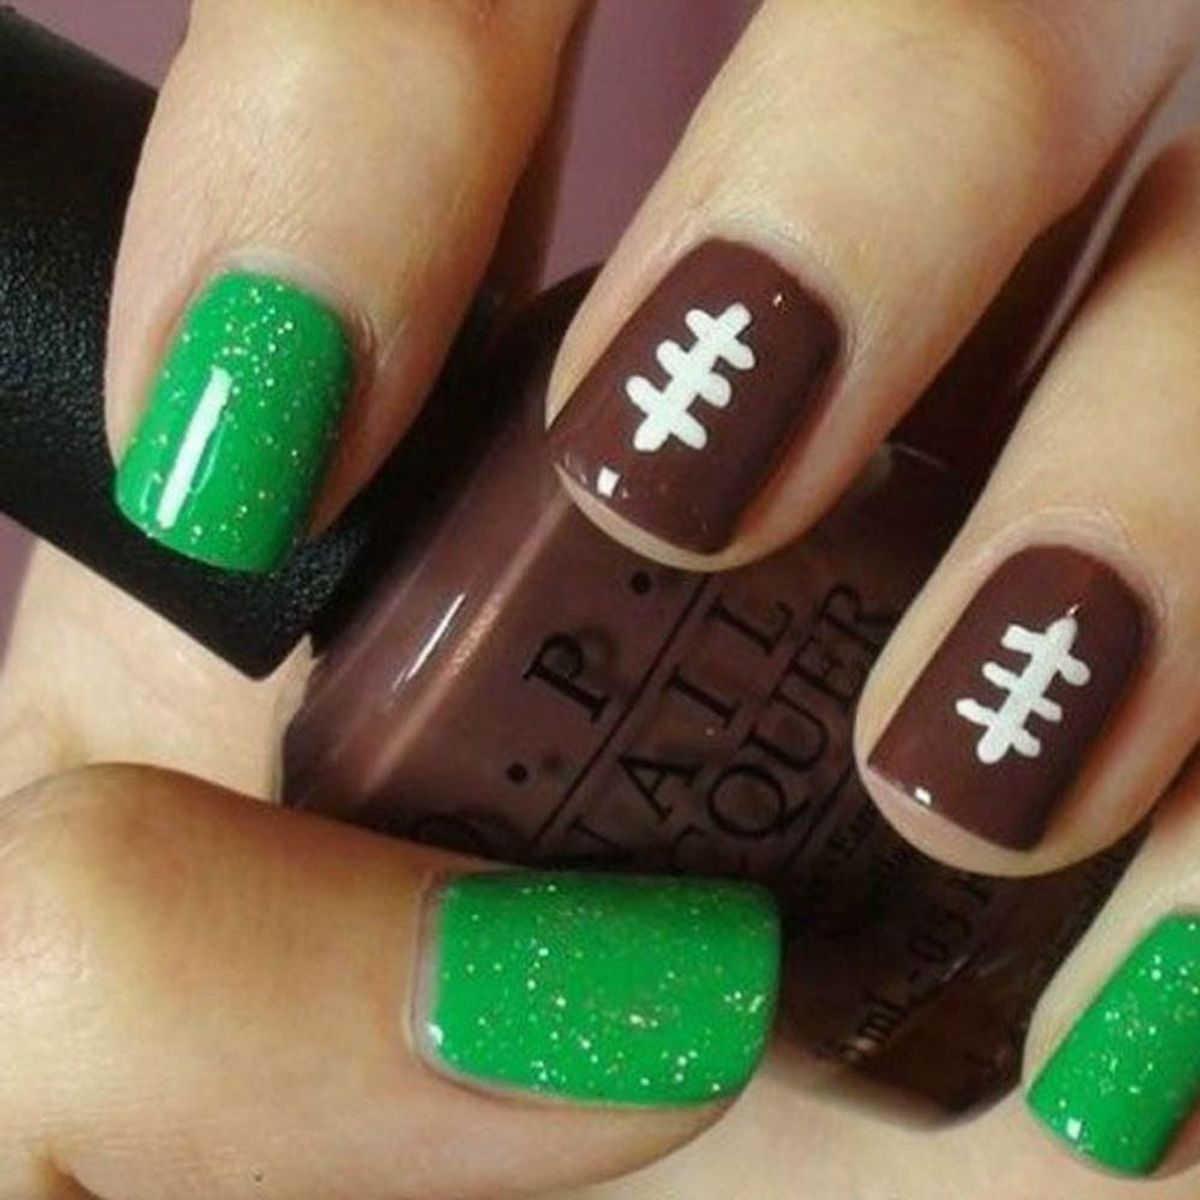 11 Nail Art Designs to Rock on Super Bowl Sunday